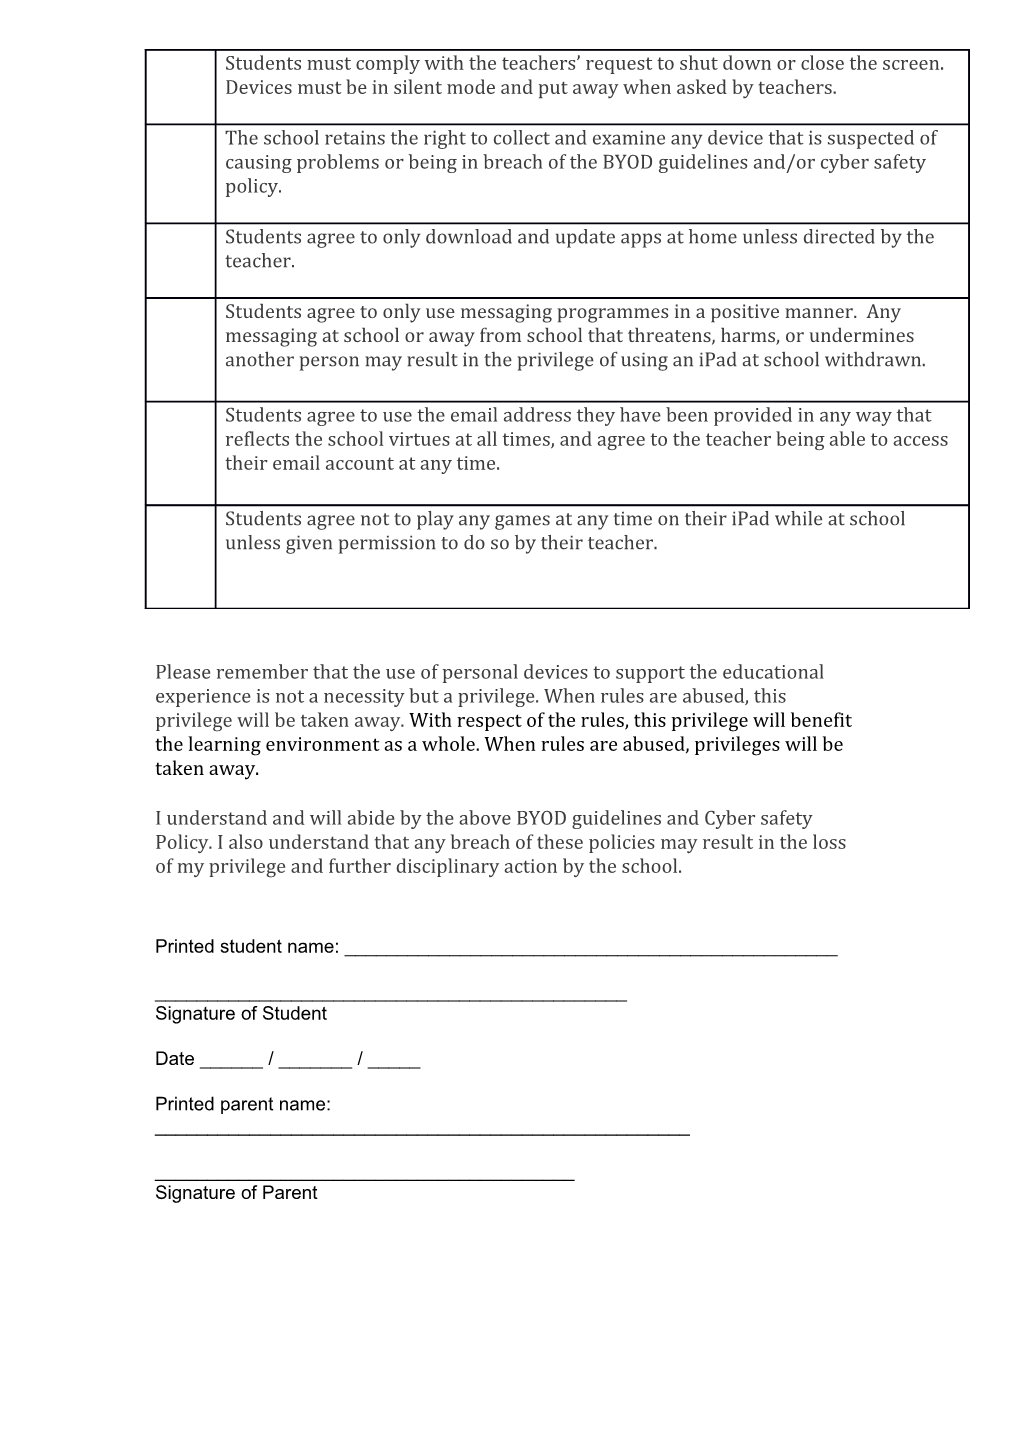 BYOD Agreement Form and Protocol for the Use of Ipad S at Leamington School